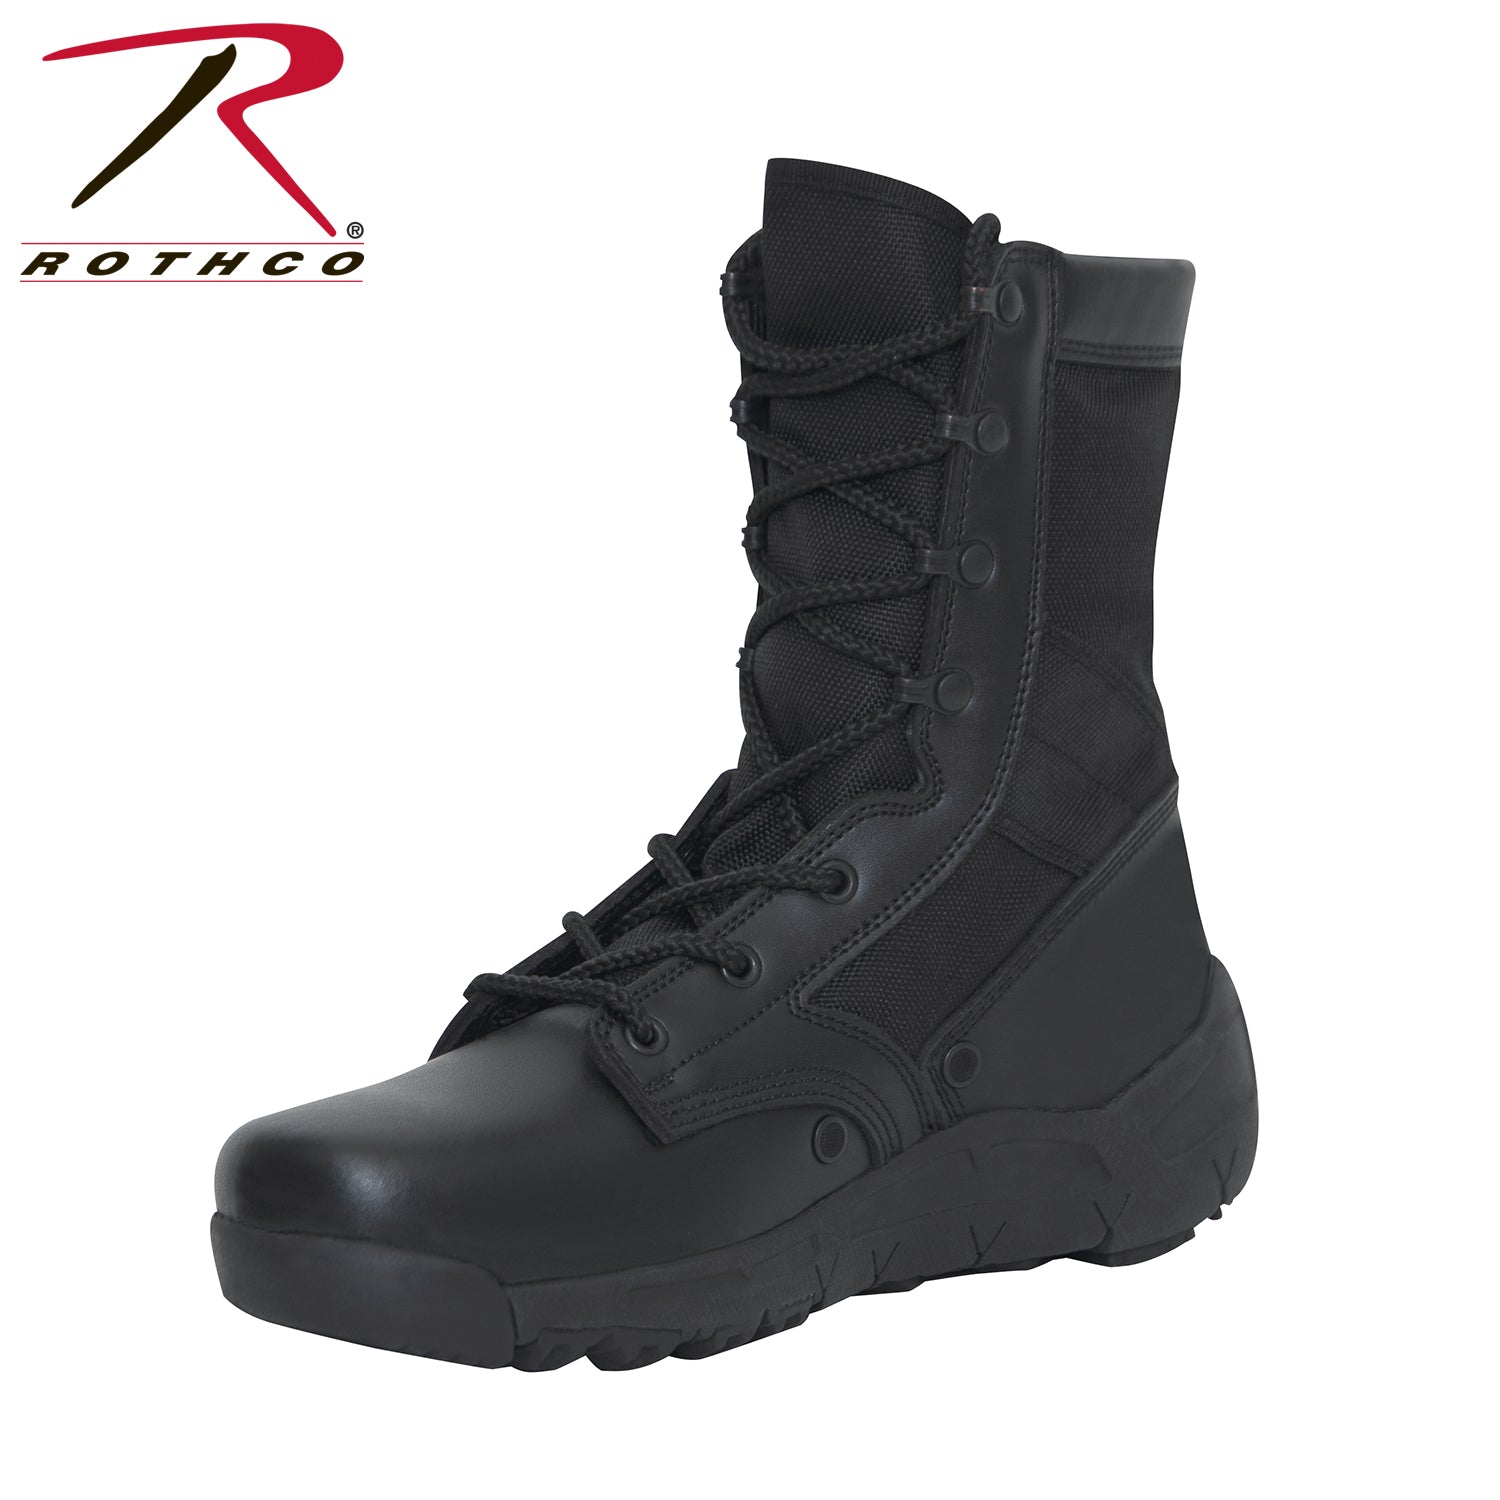 V-Max Lightweight Tactical Boot - 8